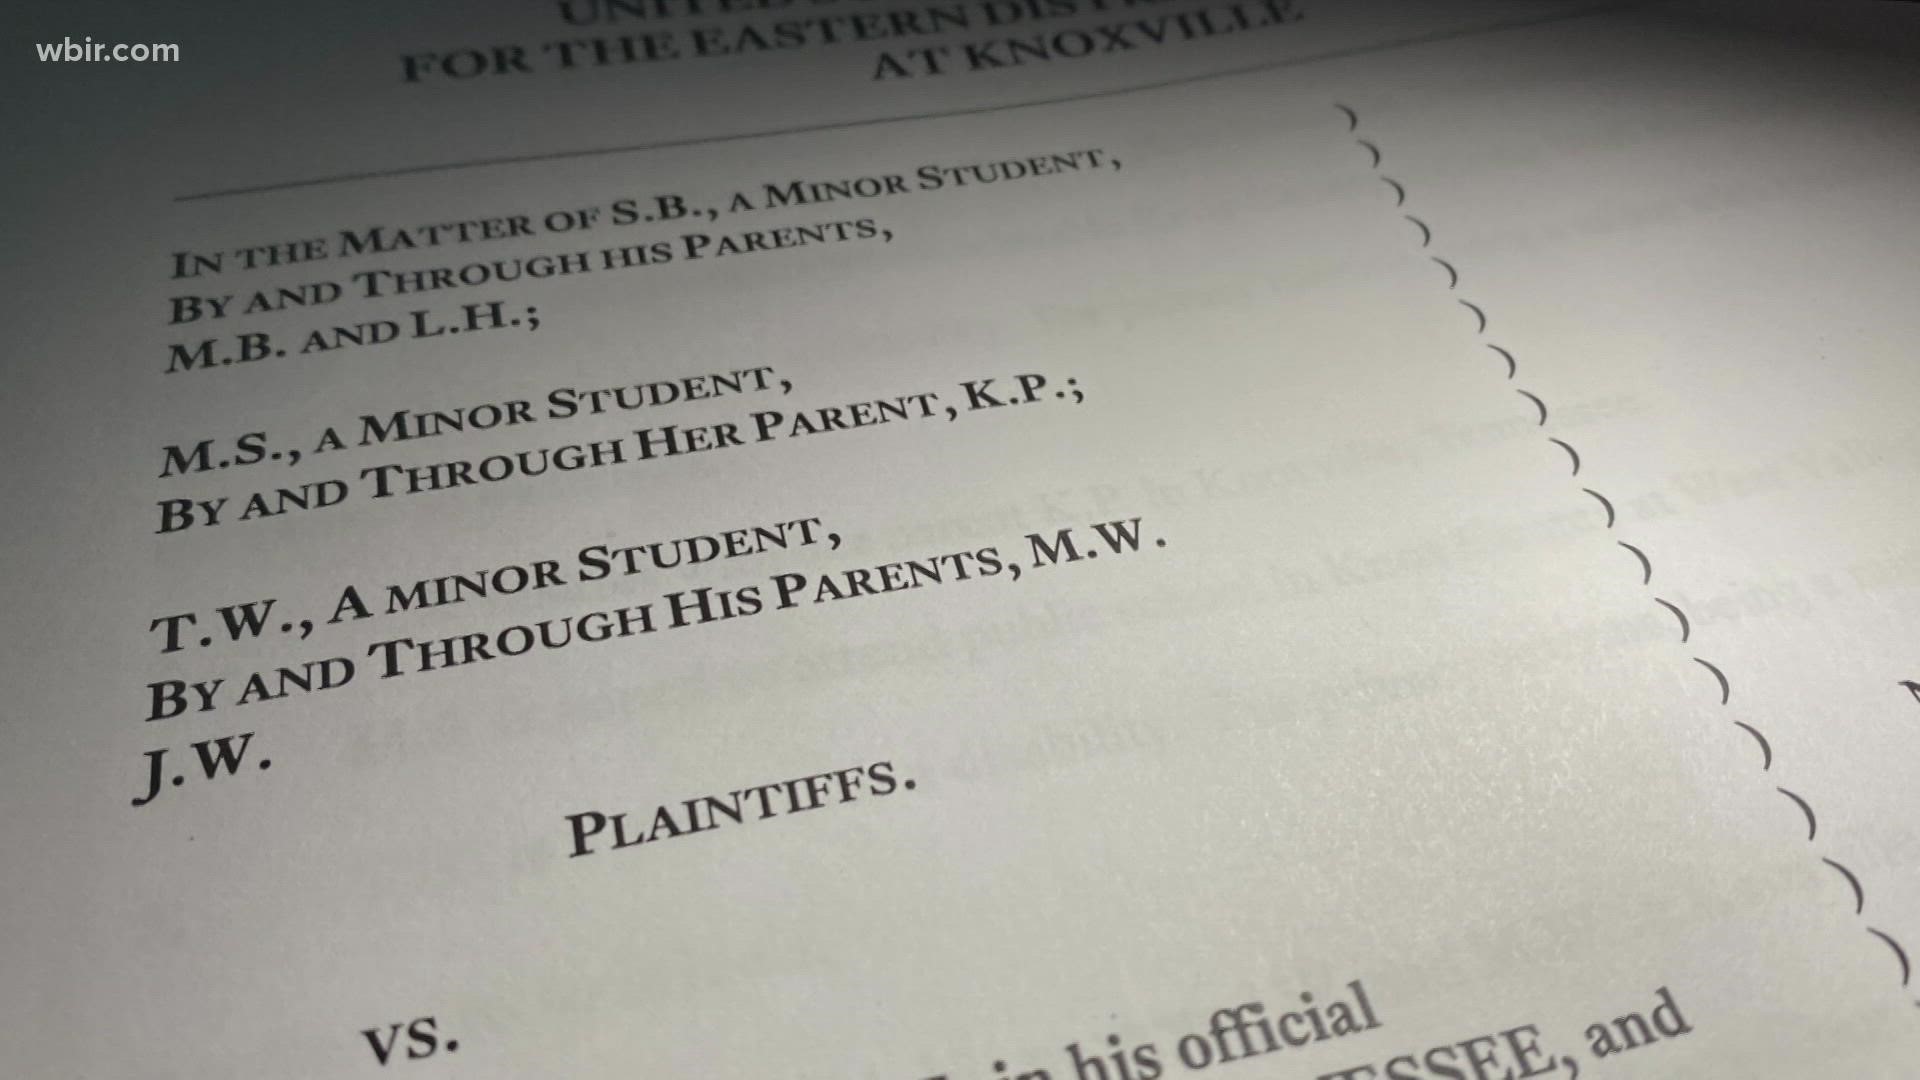 The lawsuit was filed by the parents of four young children in the KCS district.